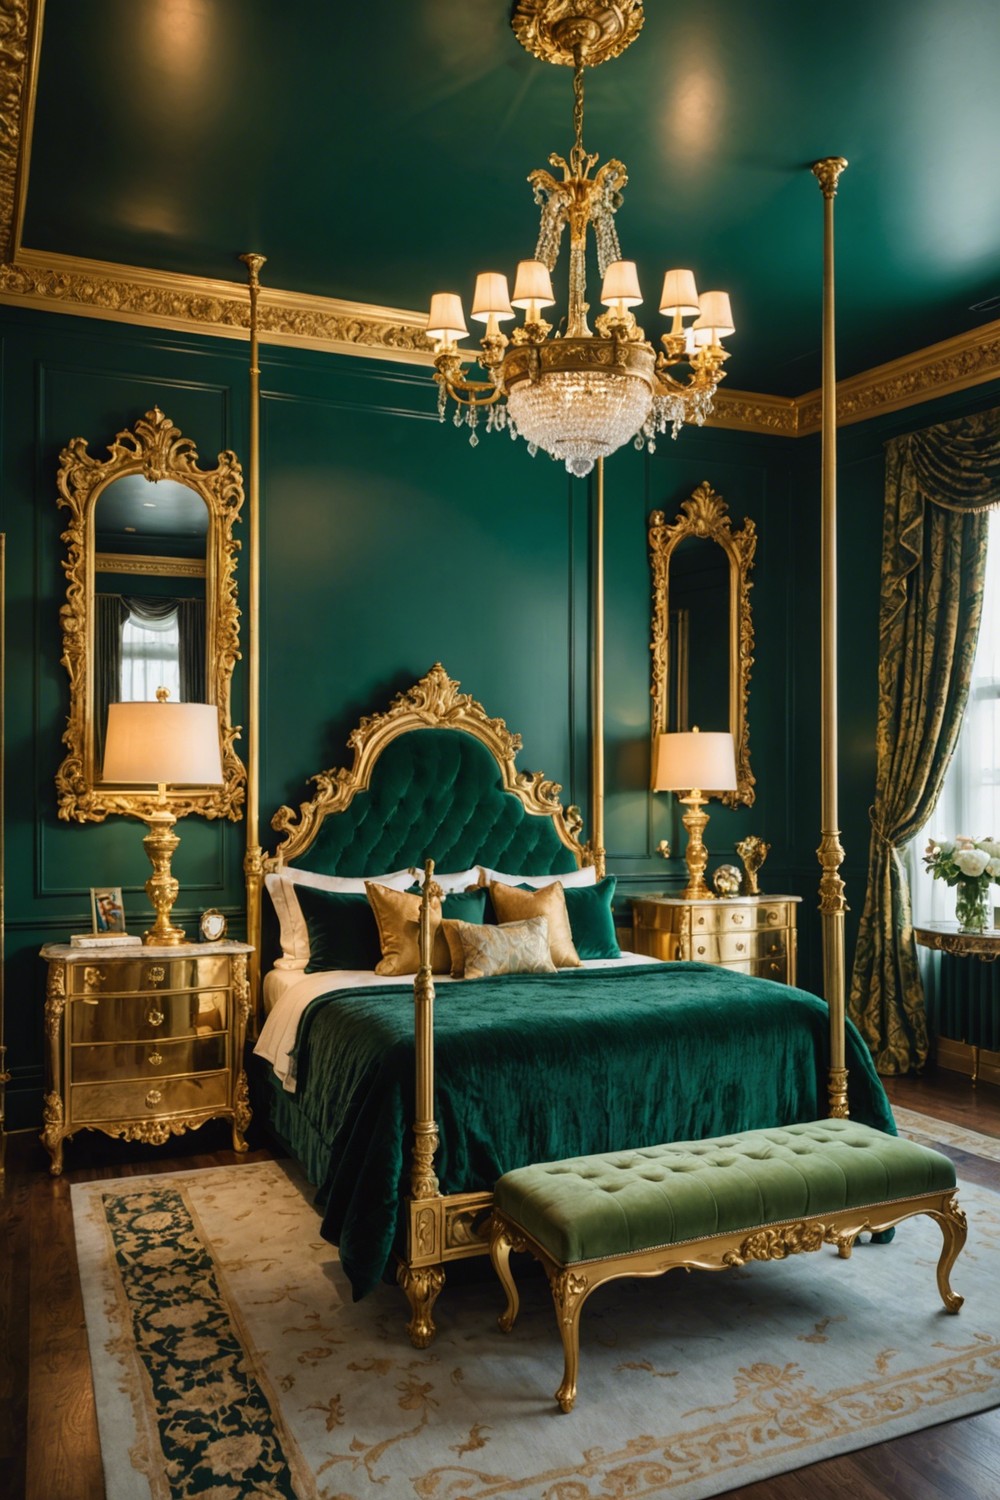 Bold Accent: Emerald Green Walls and Gold Hardware